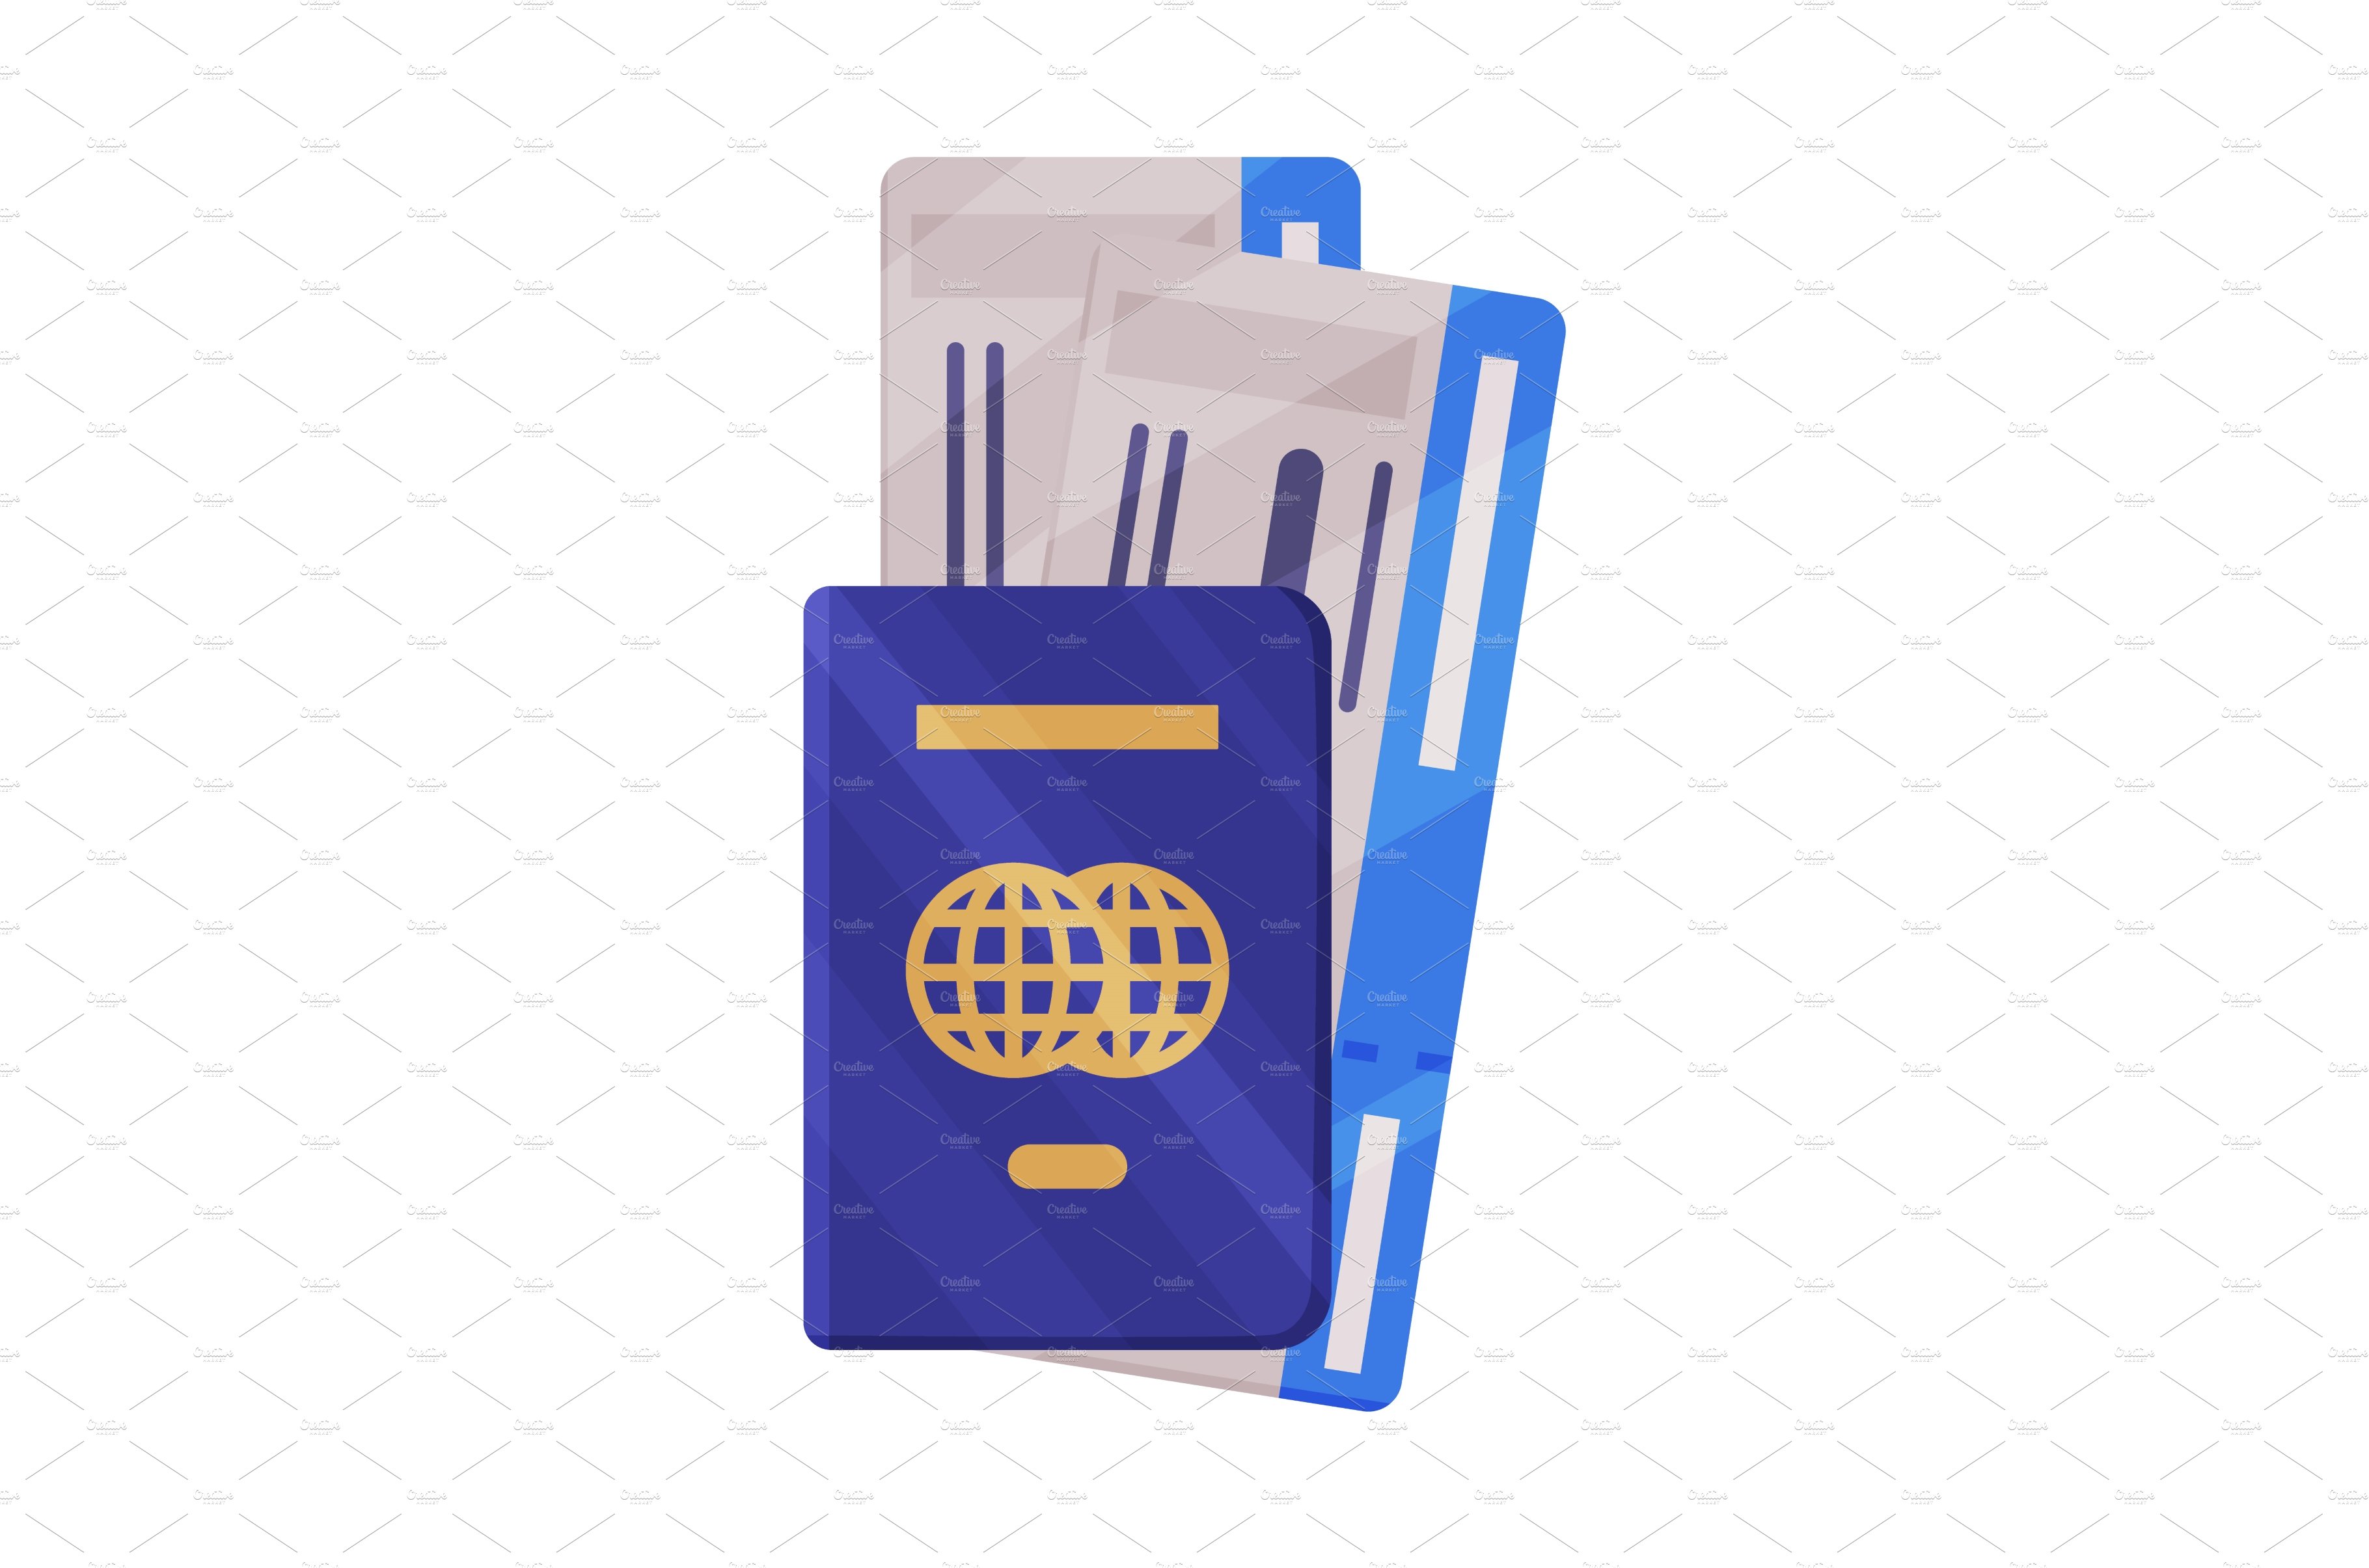 Boarding Tickets and Passport as cover image.